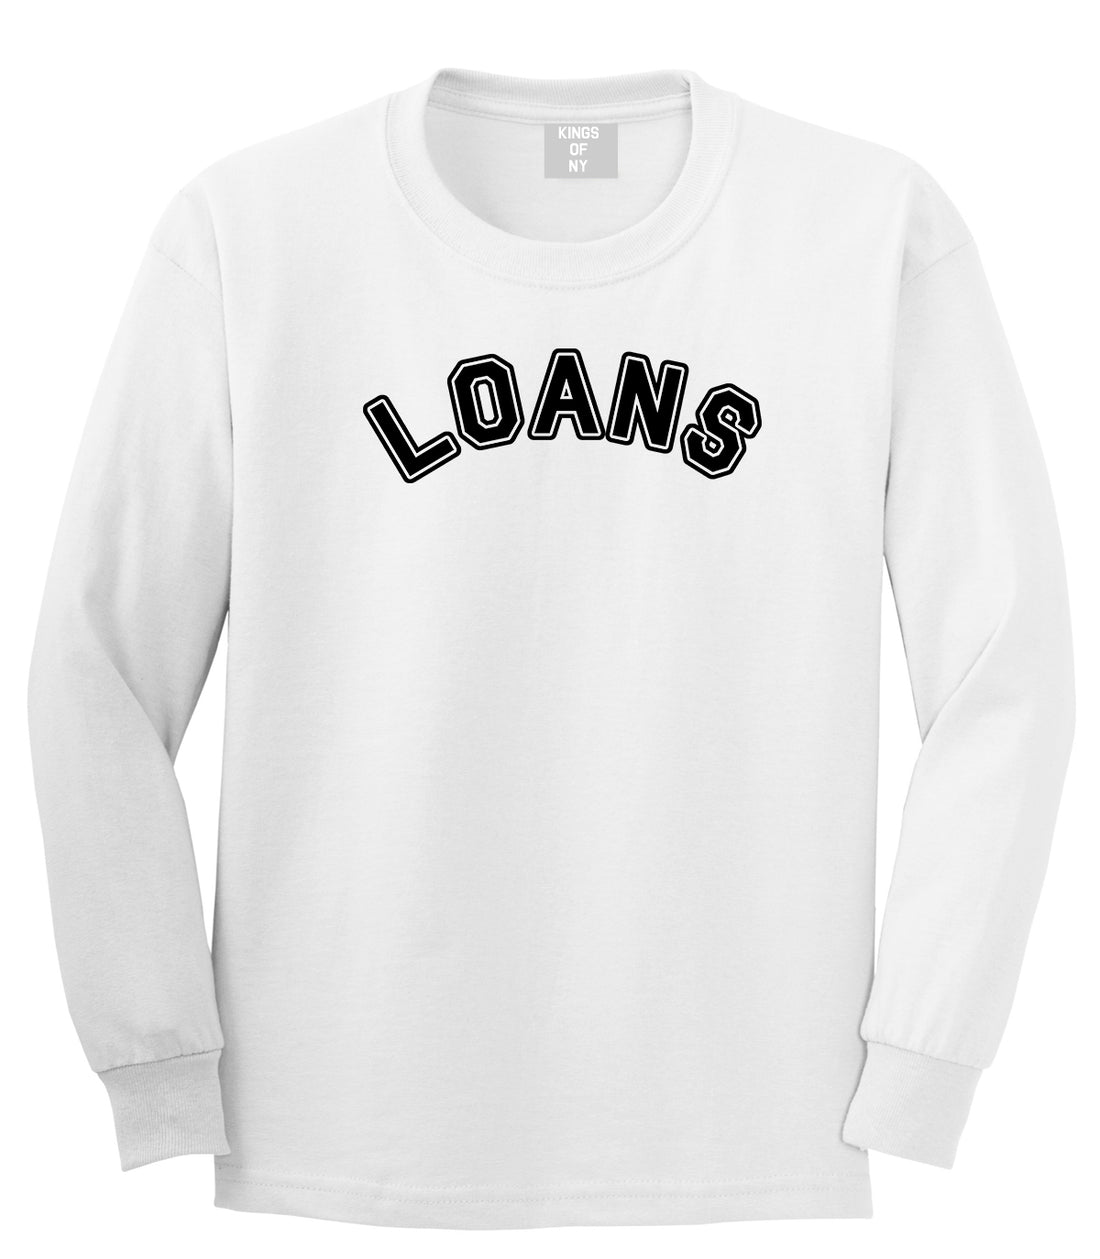 Student Loans College Long Sleeve T-Shirt in White